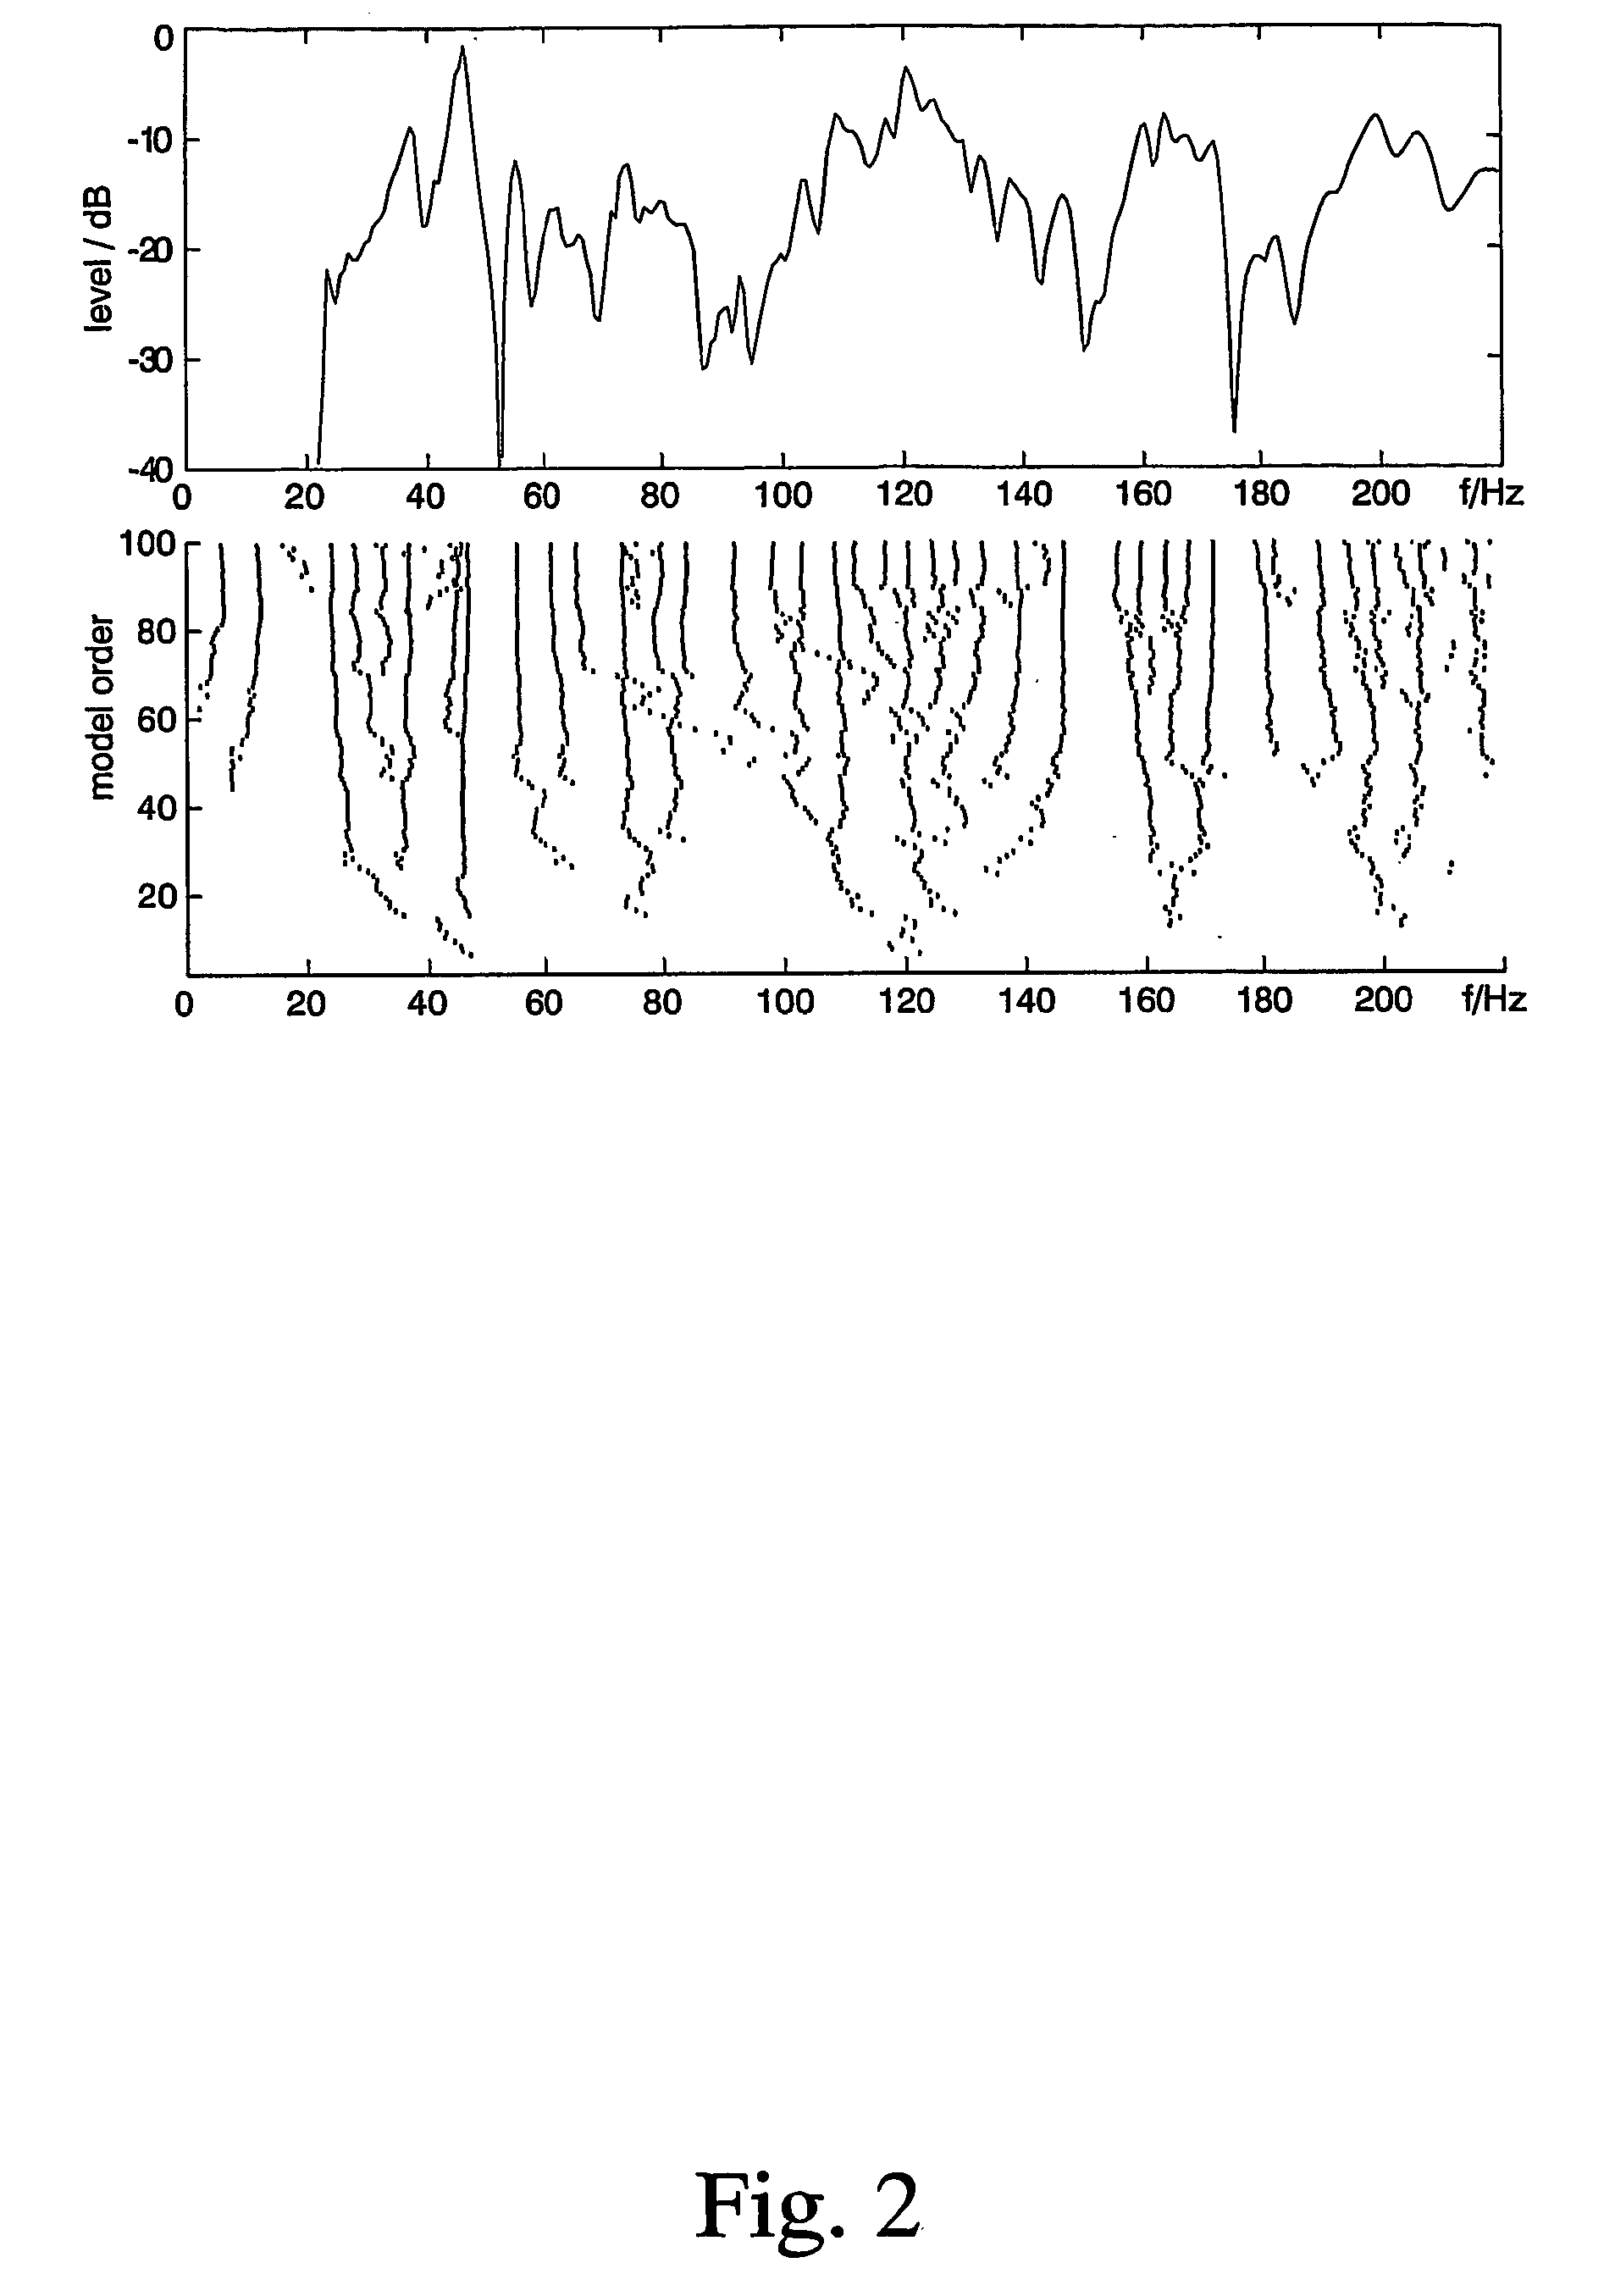 Method for designing a modal equalizer for a low frequency audible range especially for closely positioned modes